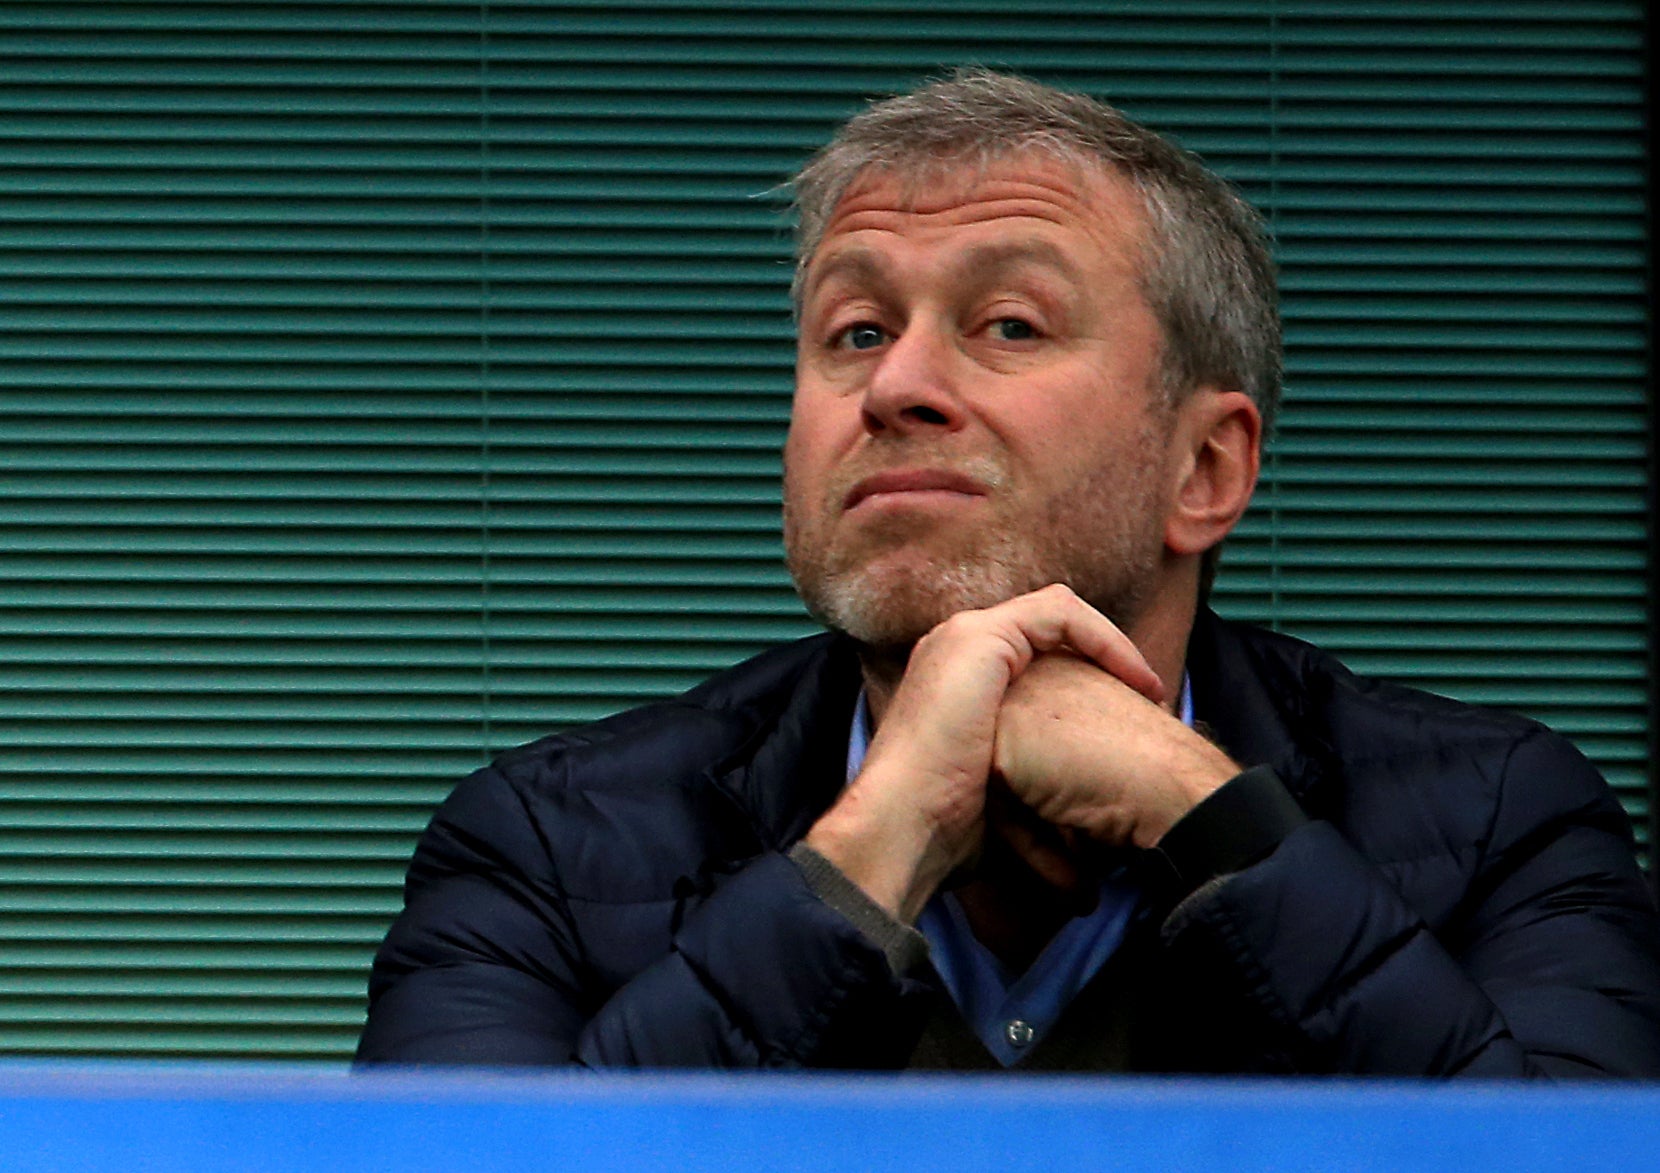 Roman Abramovich has put Chelsea up for sale after 19 years owning the Premier League club